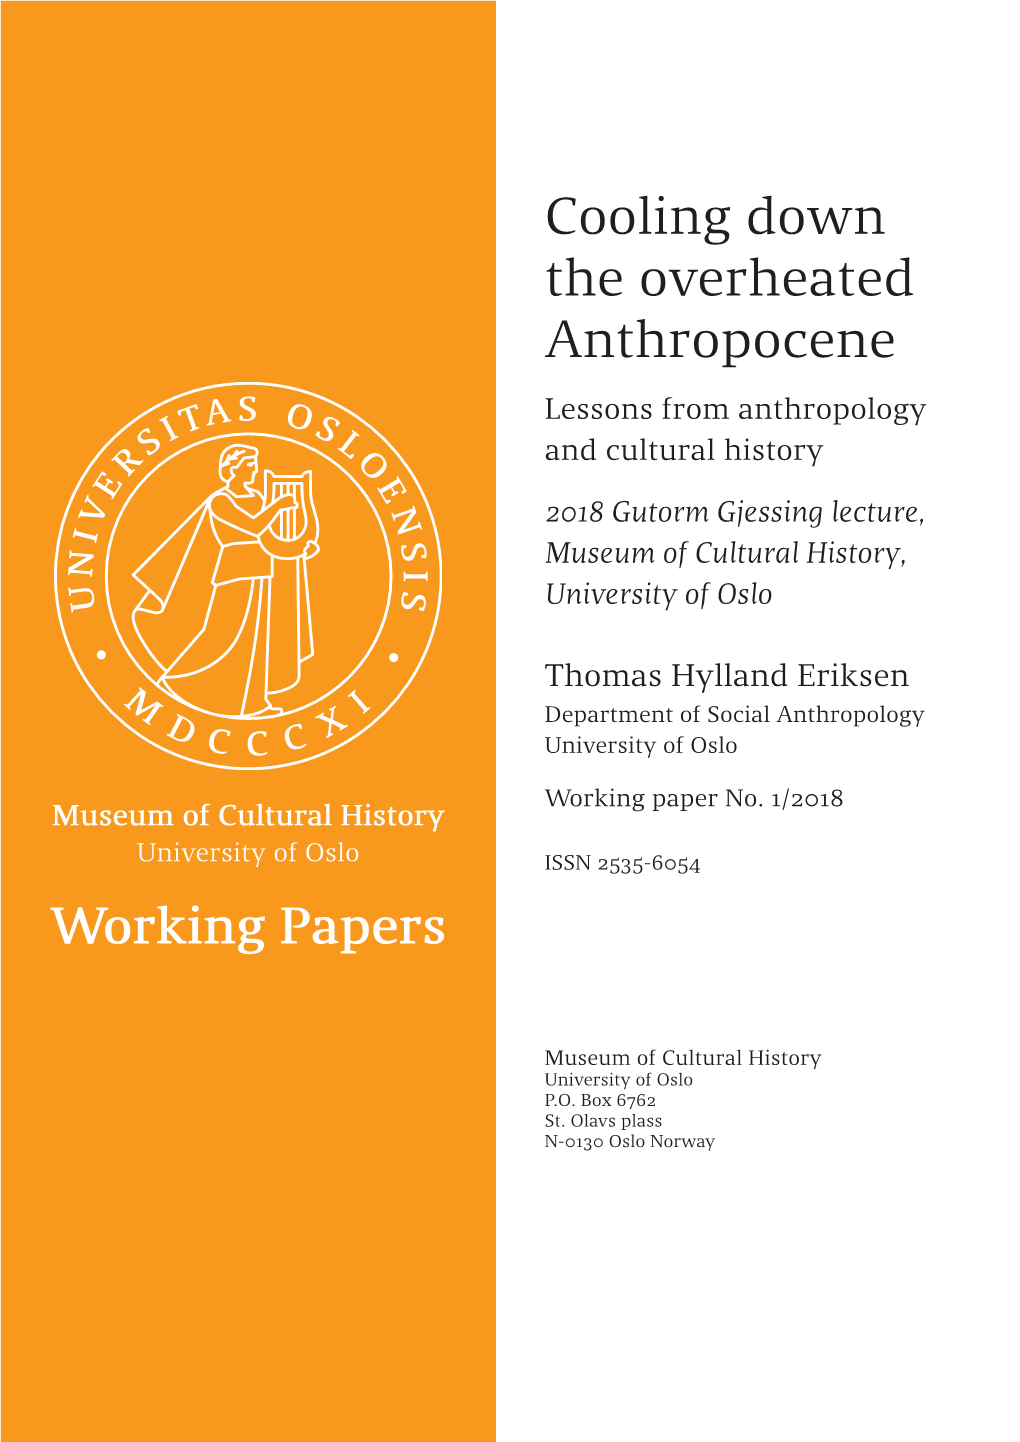 Working Papers Cooling Down the Overheated Anthropocene